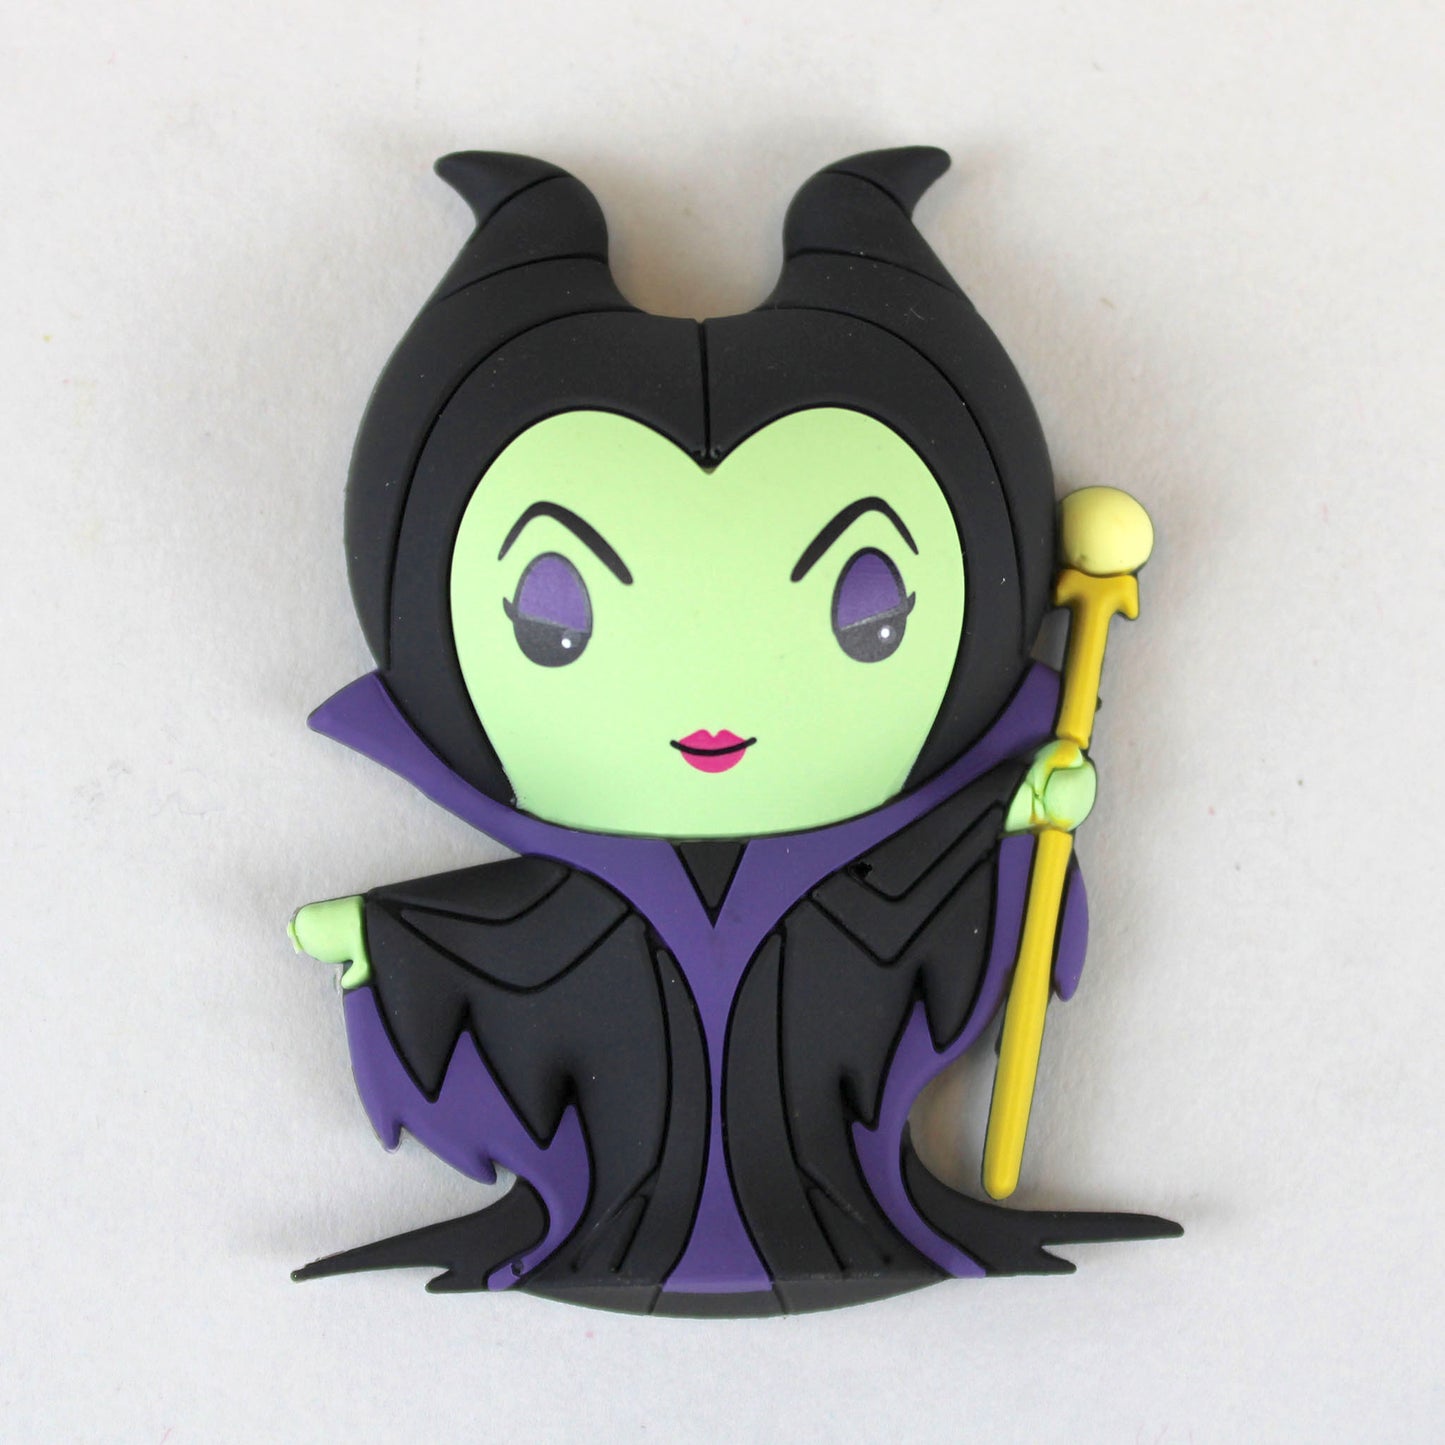 Scary Disney: Sleeping Beauty: Maleficent, The Spindle Wheel and the Dragon